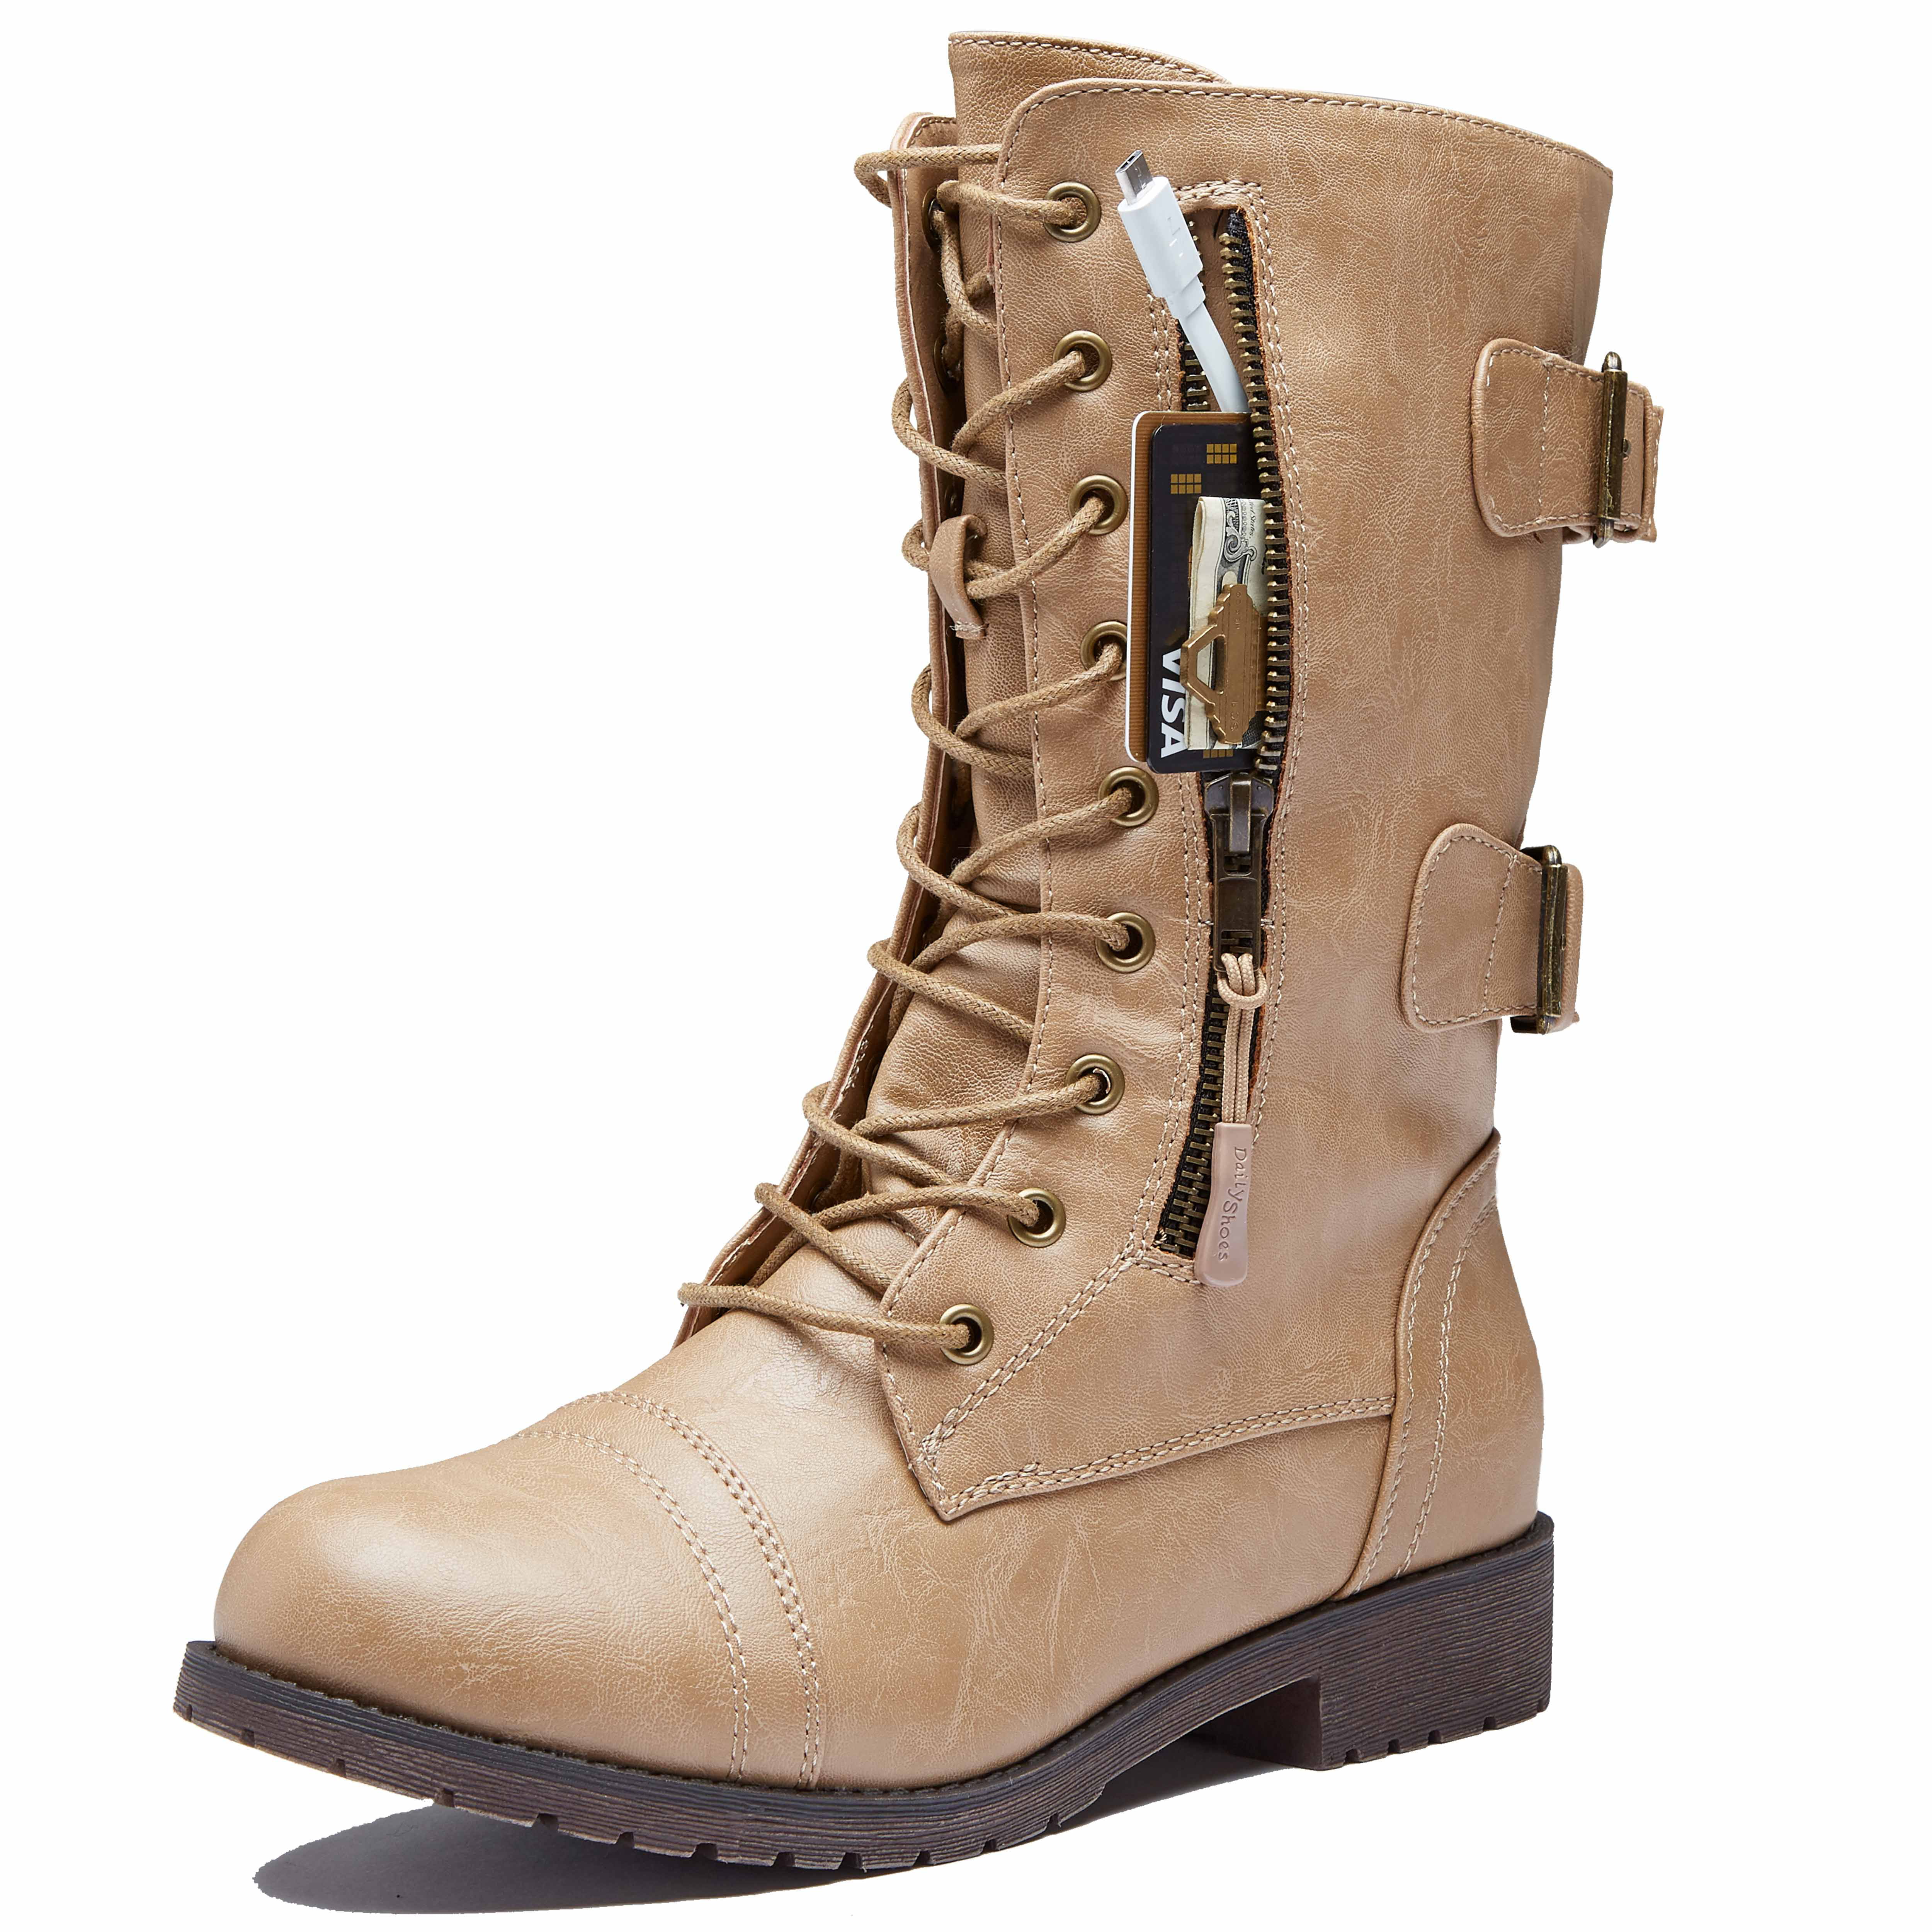 DailyShoes Women's Knee High Ankle Buckle Strap Military Combat Boots 